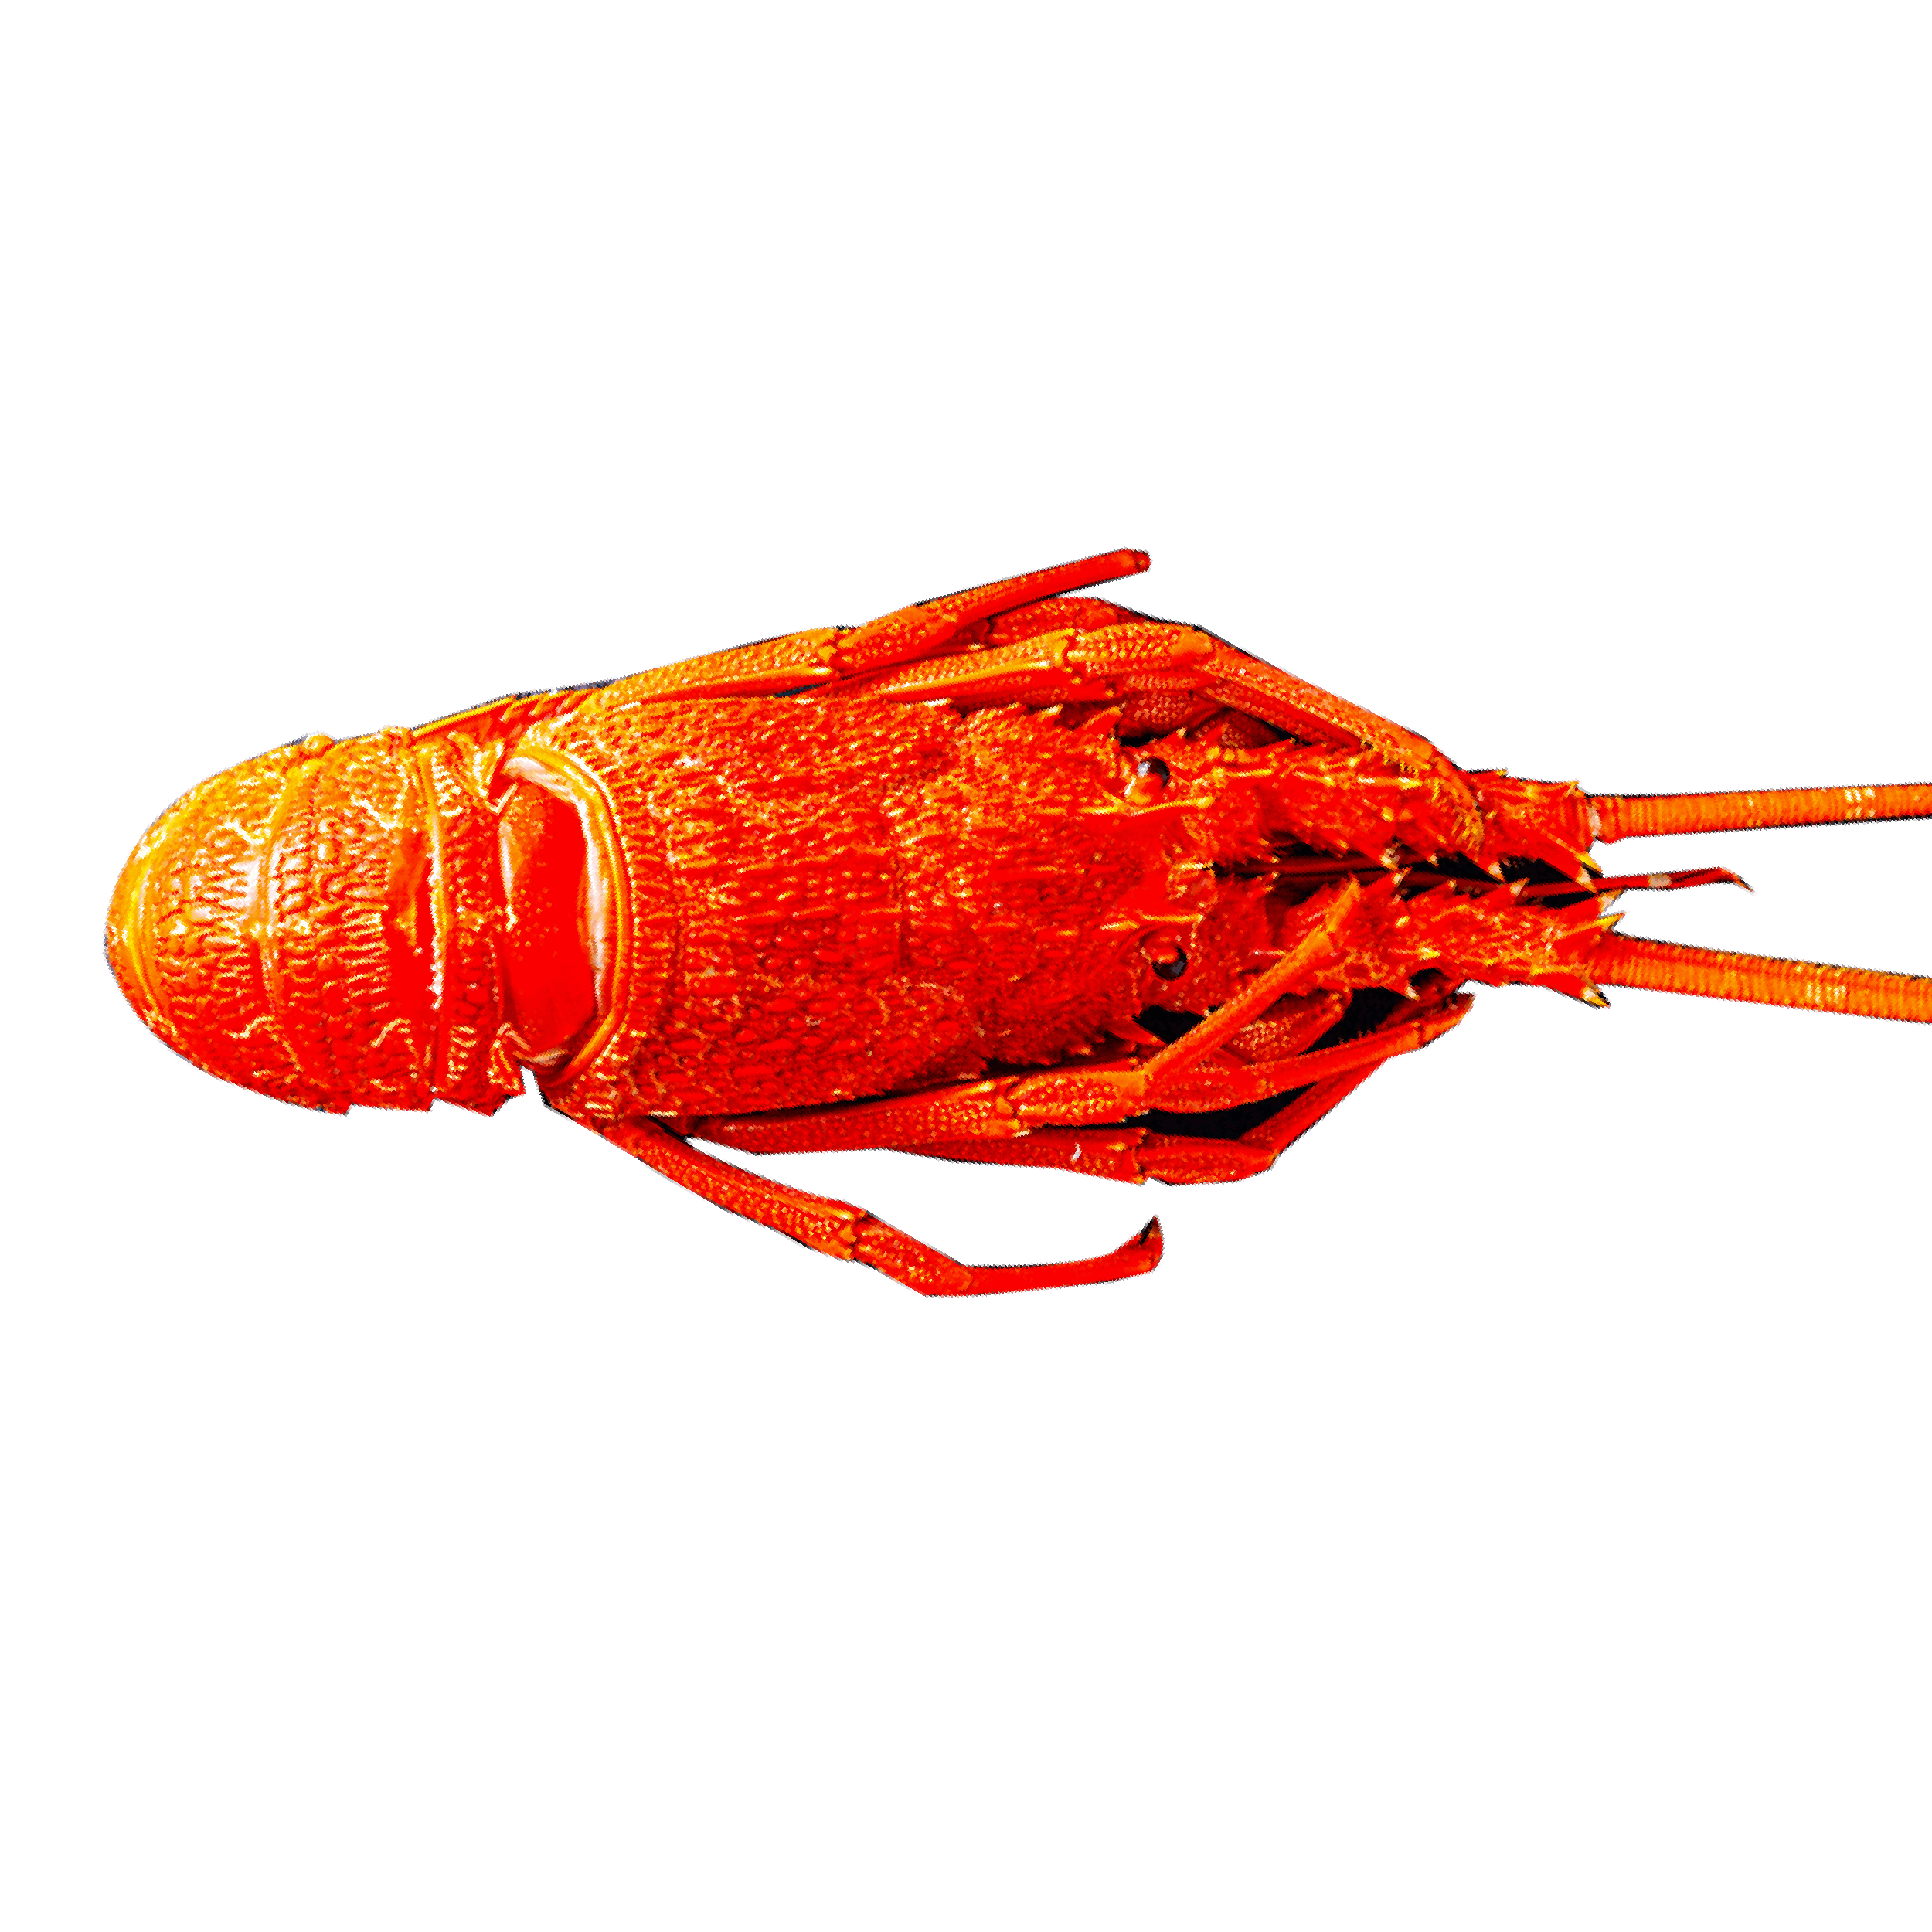 Southern Rock Lobster (cooked)